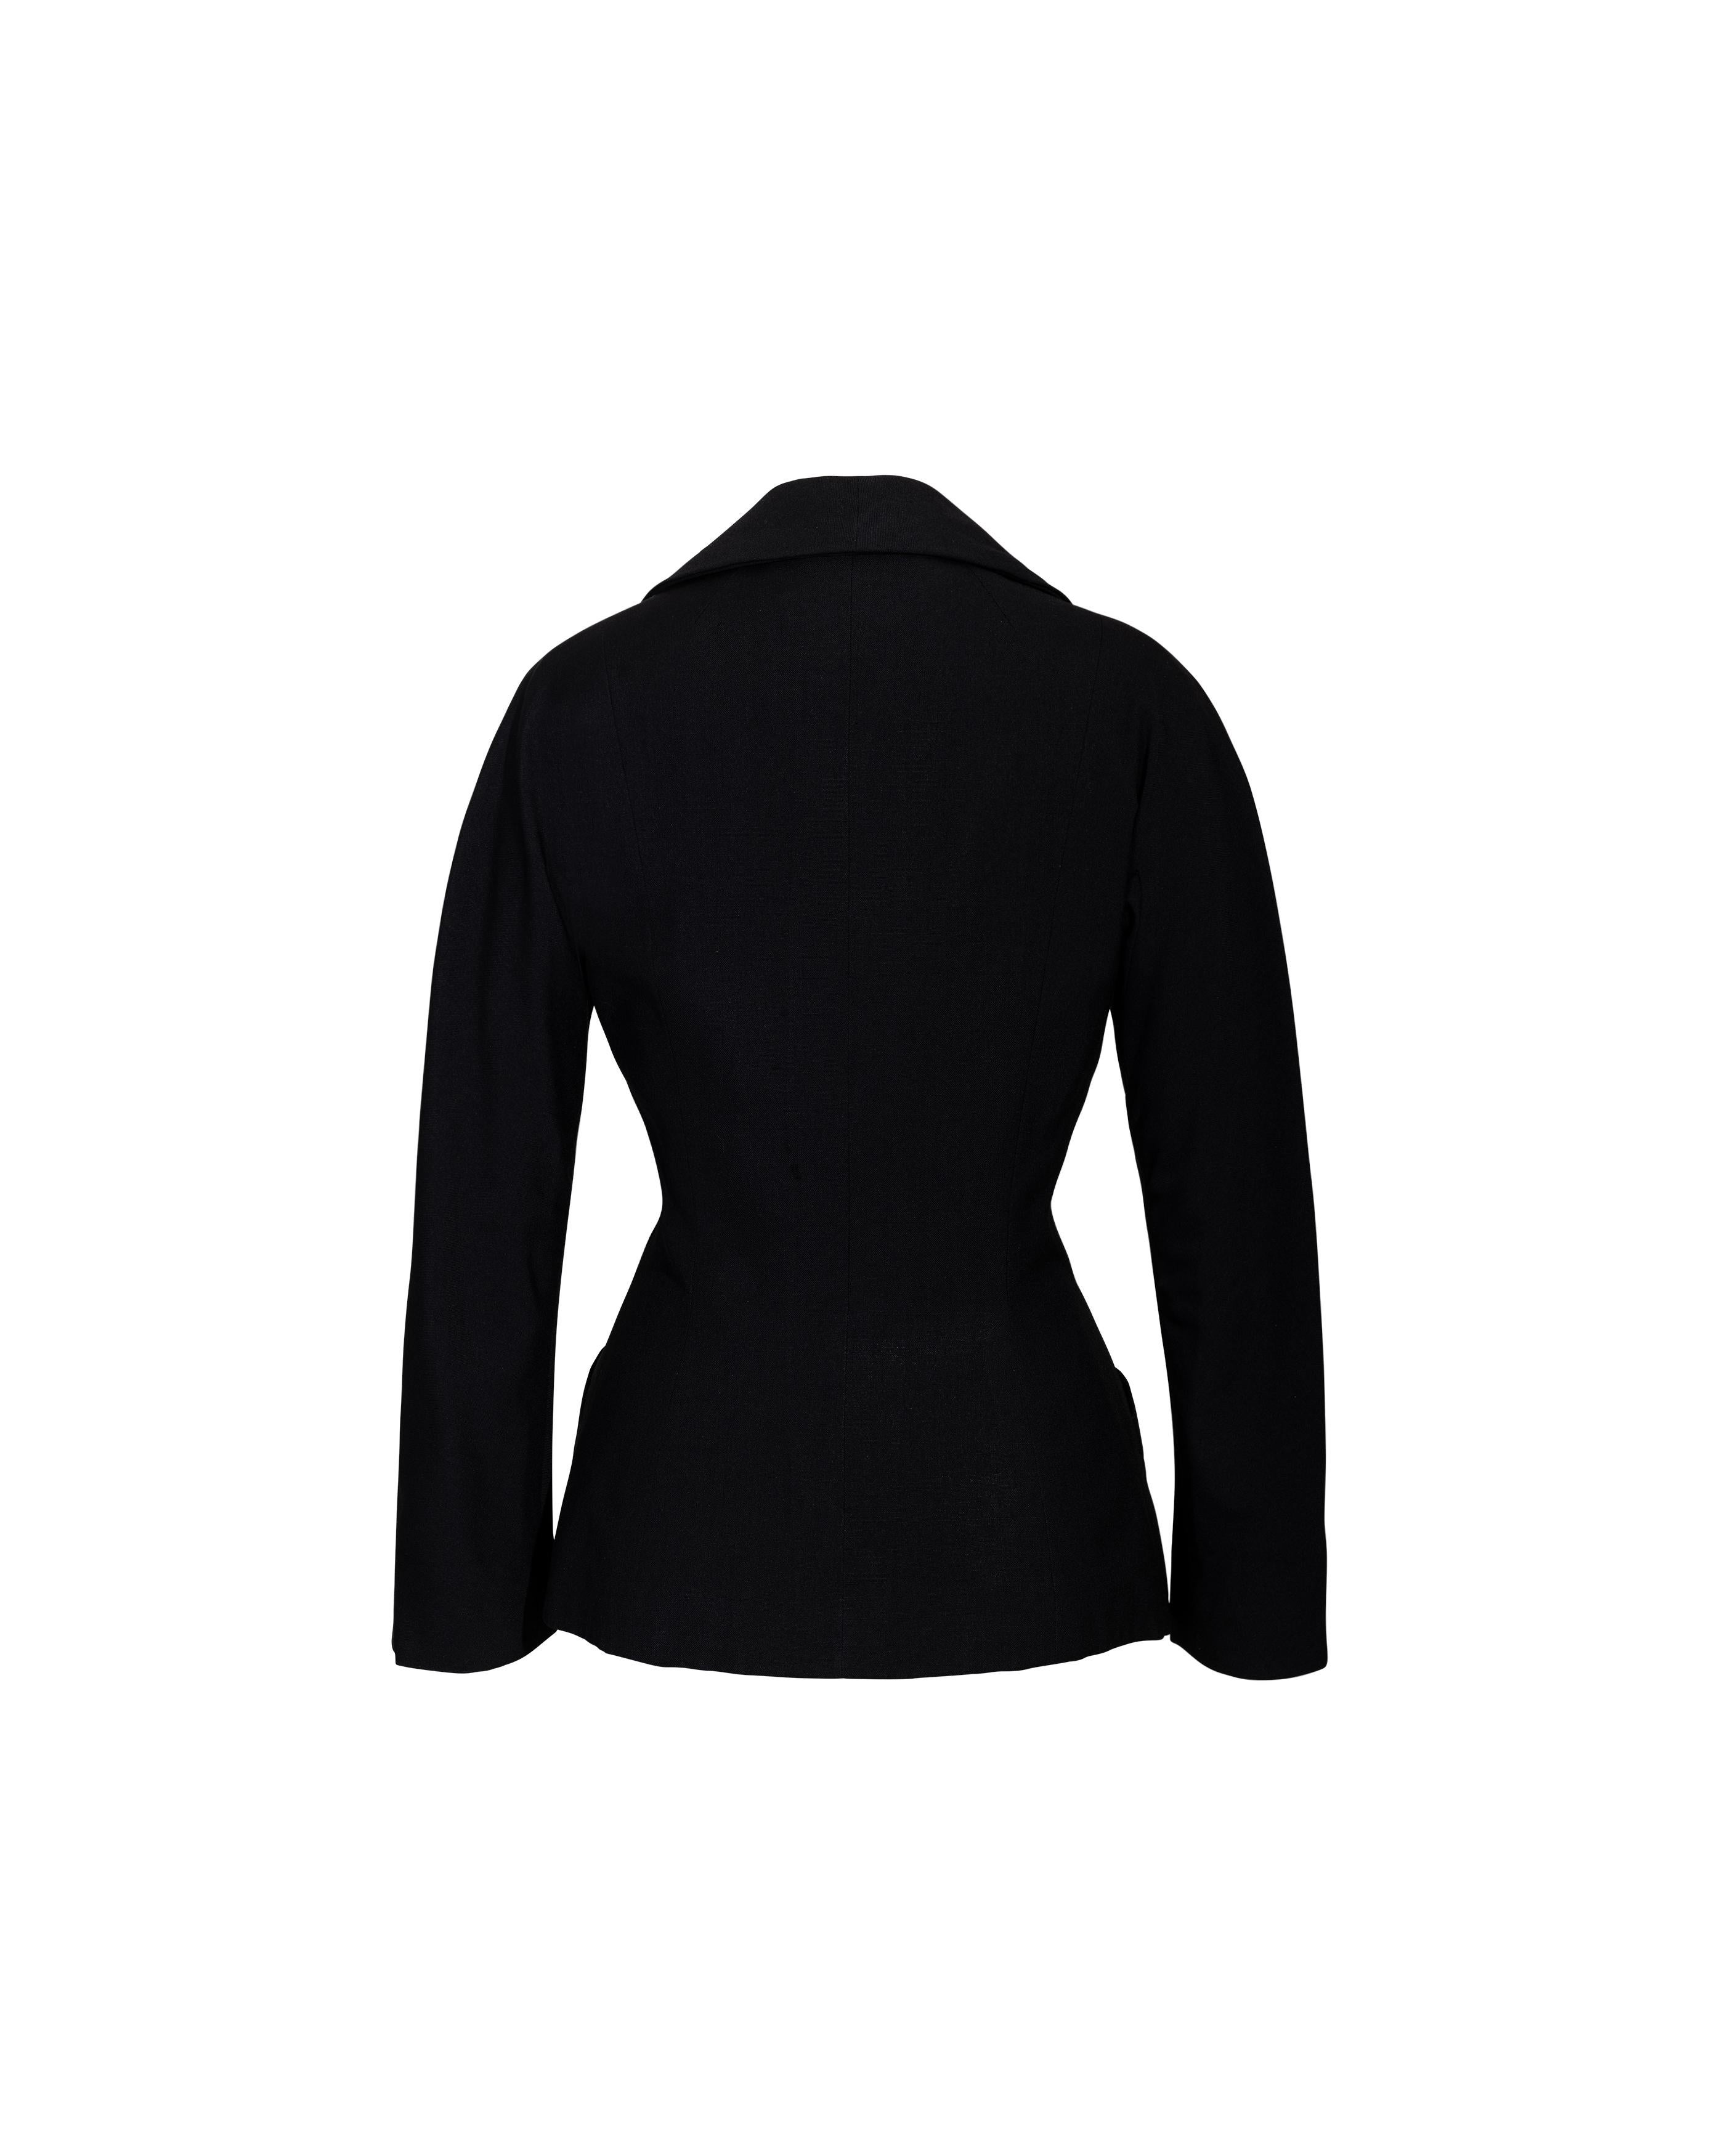 Women's c. 1950 Christian Dior 'New Look' Black Wool Jacket For Sale